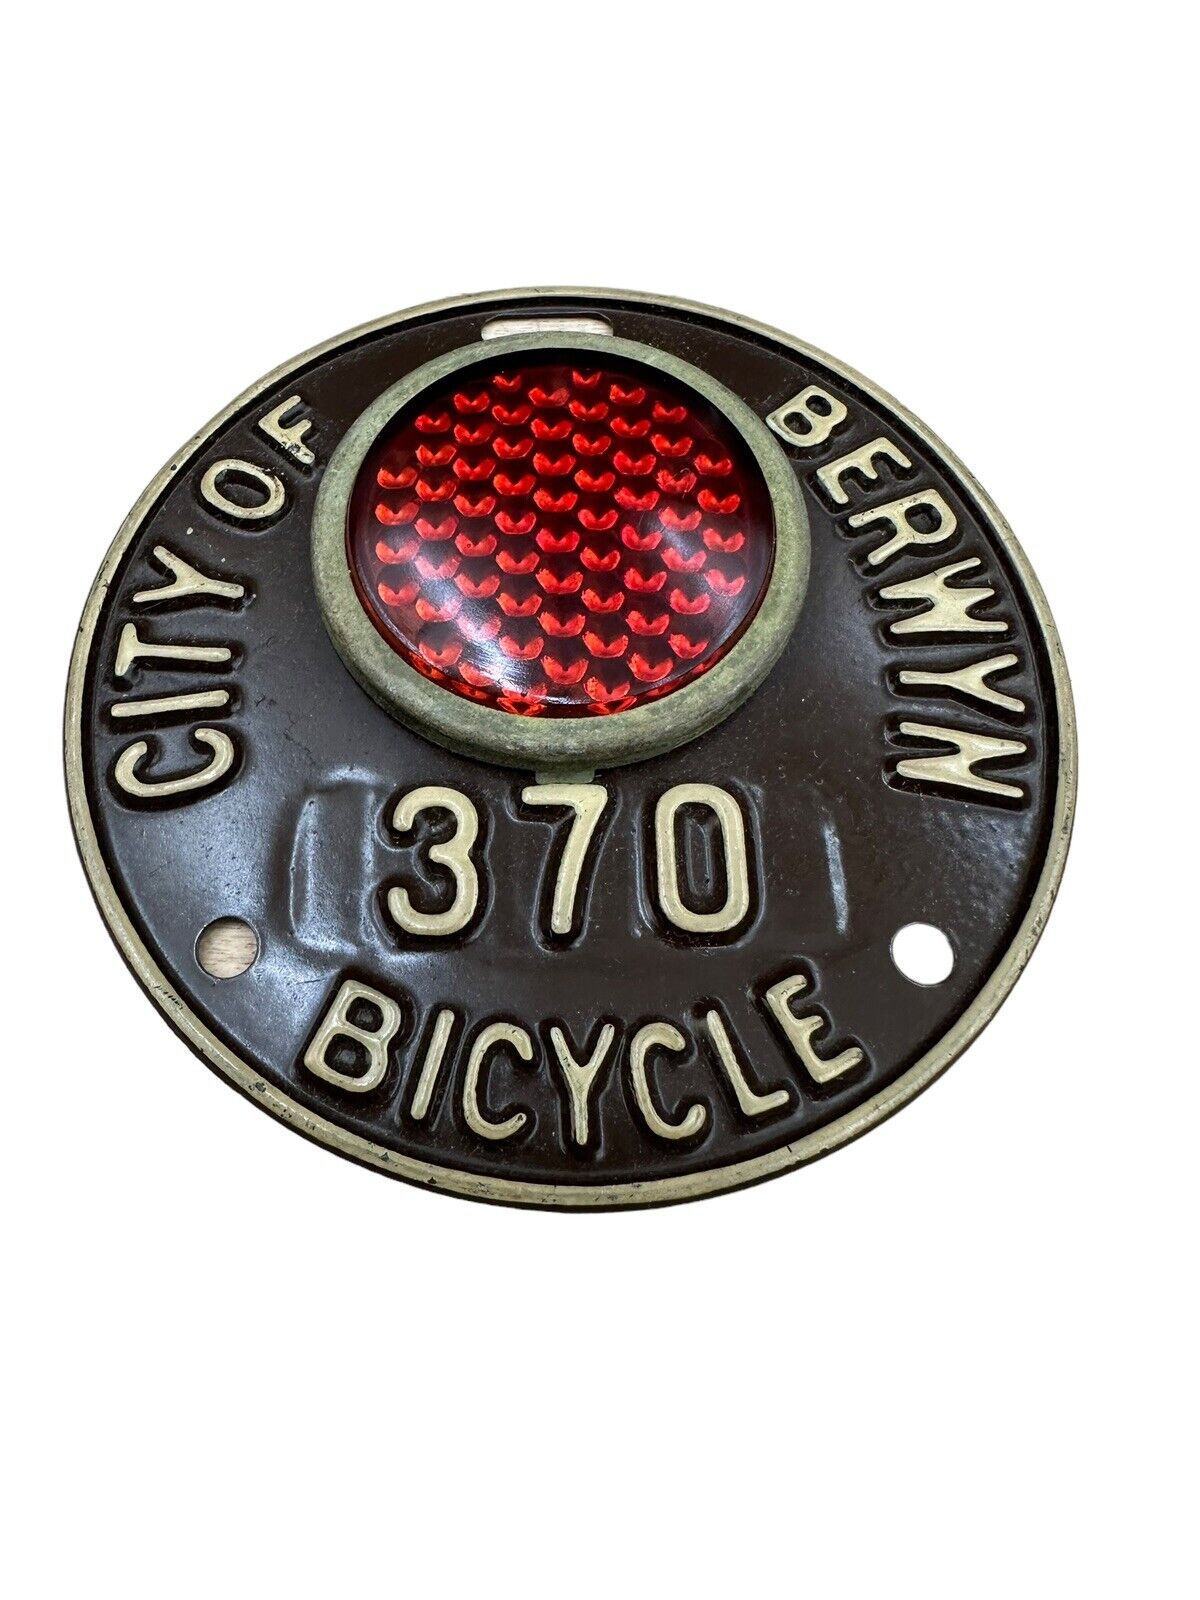 ANTIQUE MINT EXTREMELY RARE CITY OF BERWYN CHICAGO BICYCLE LICENSE PLATE